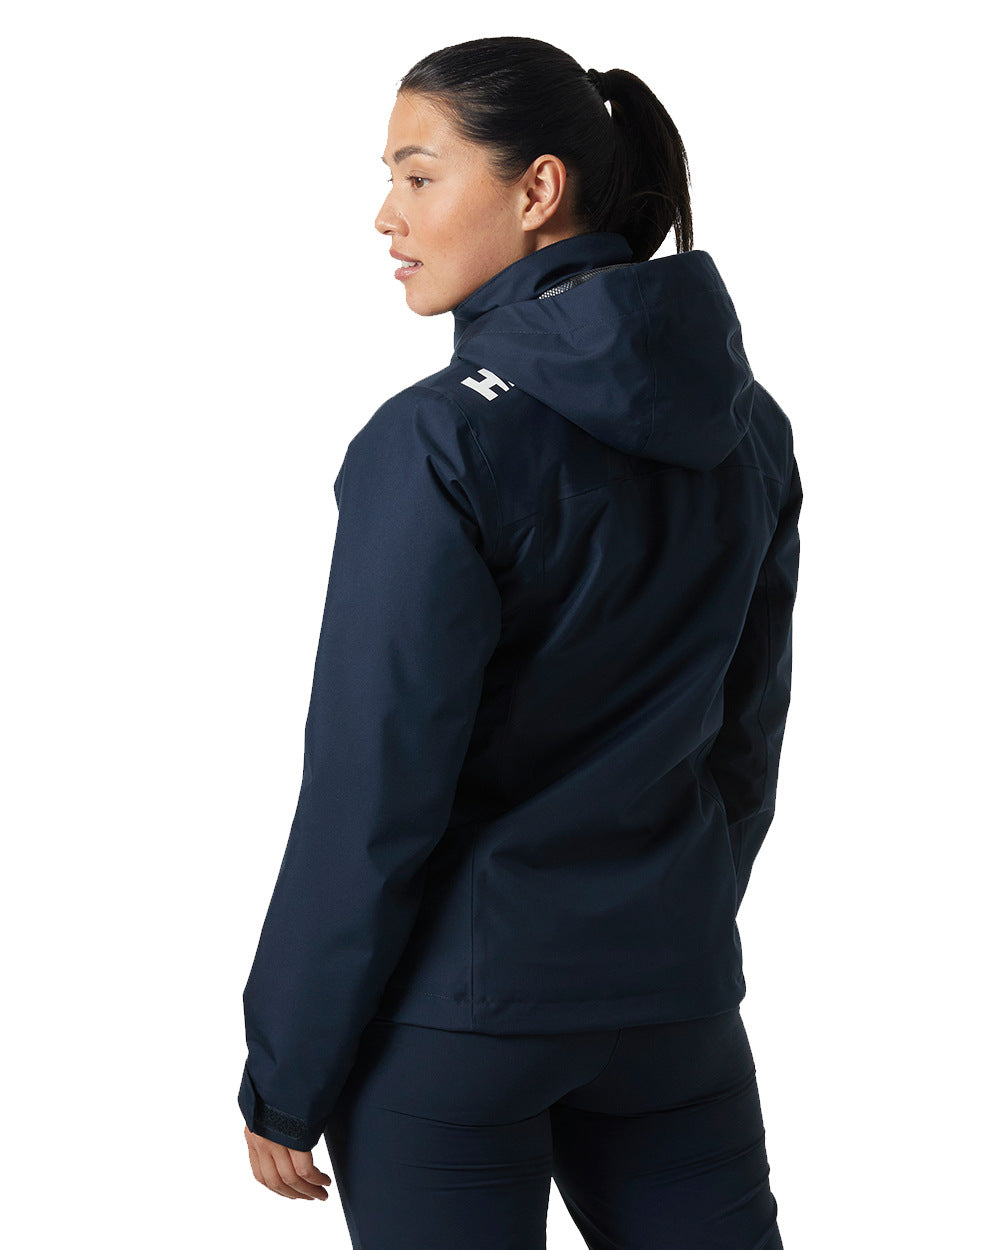 Navy Coloured Helly Hansen Womens Crew Hooded Midlayer Sailing Jacket 2.0 On A White Background 